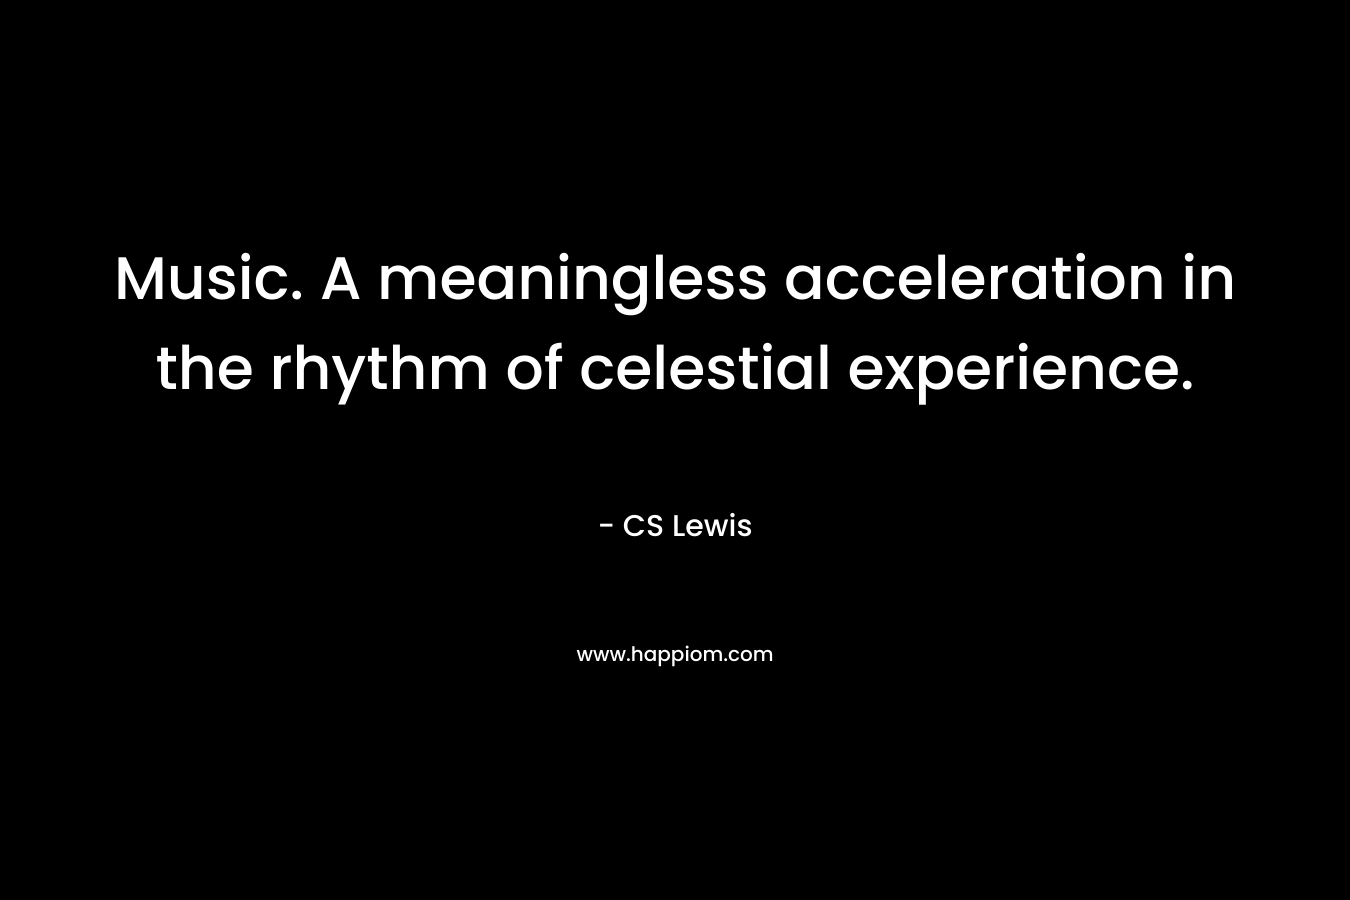 Music. A meaningless acceleration in the rhythm of celestial experience.